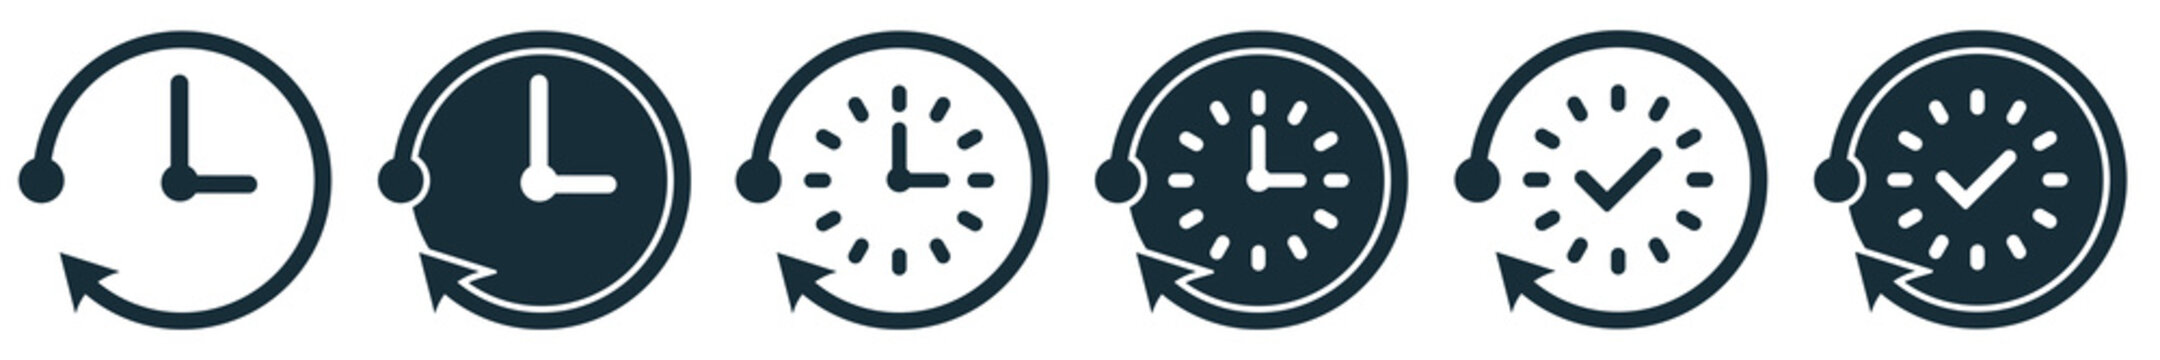 Set of overtime icons. Business and clock, symbols. Time clock signs or overtime. Vector illustration.